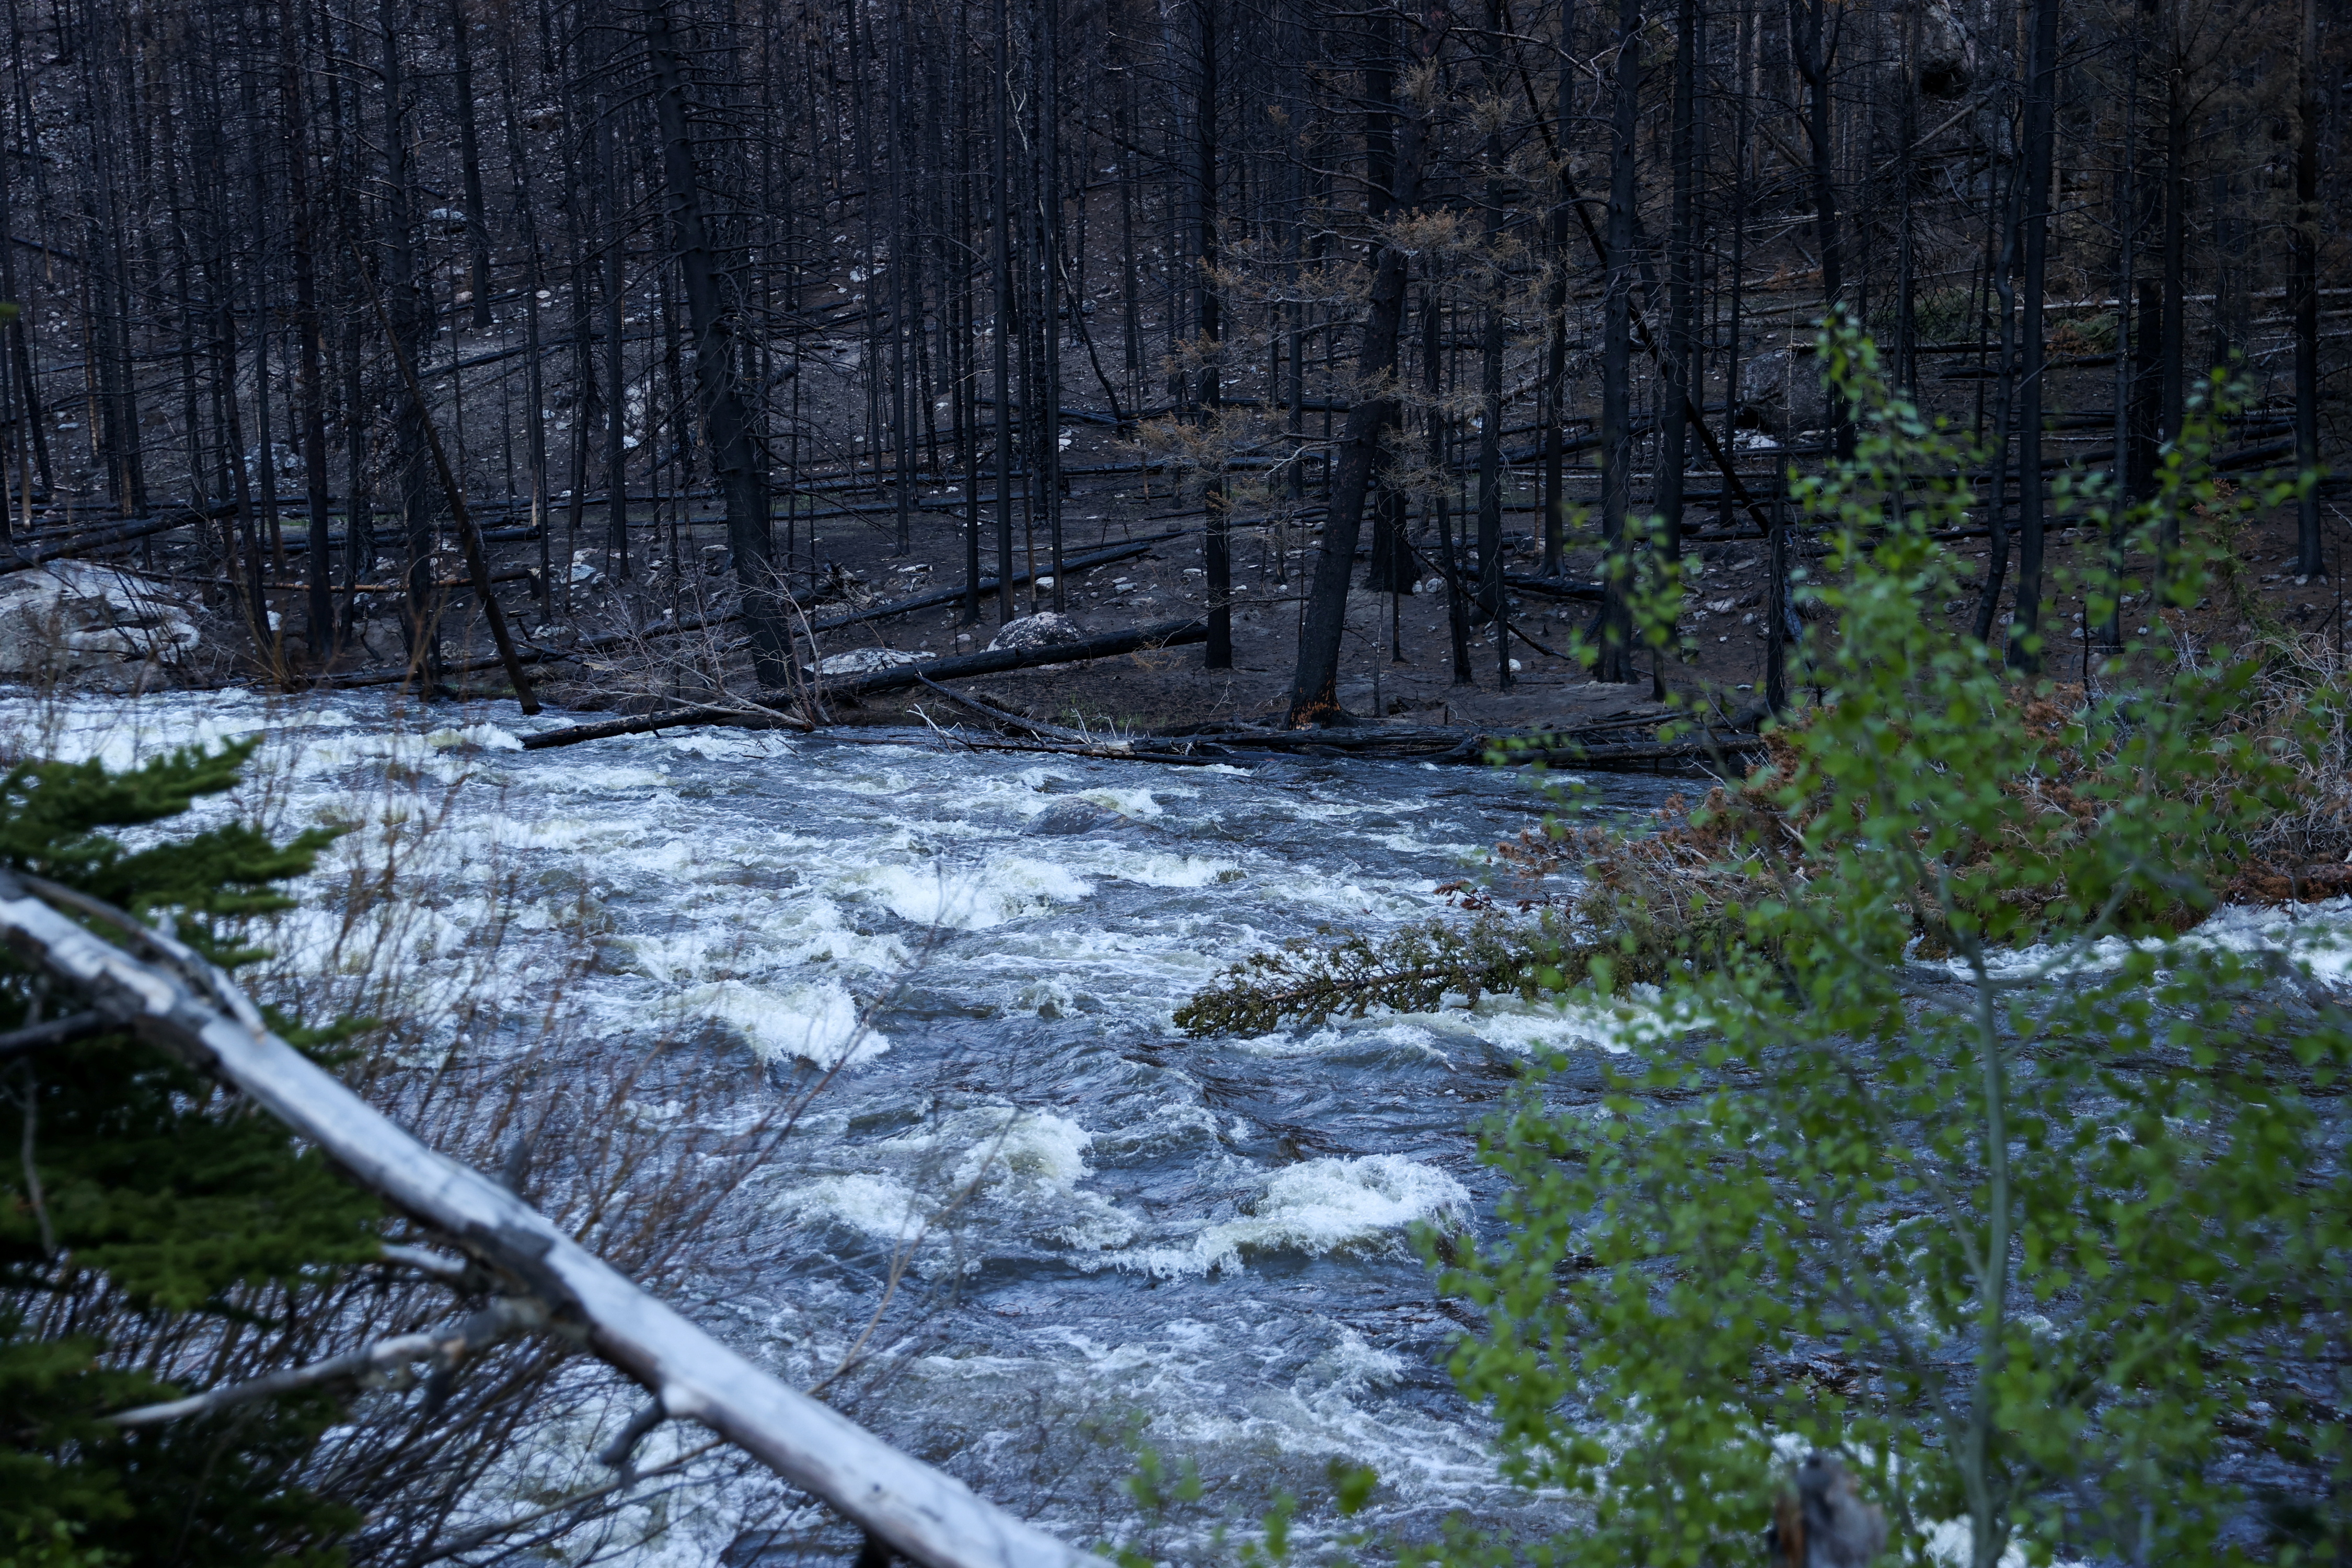 The Cameron Peak fire burn scar meets the Poudre River west of Fort Collins